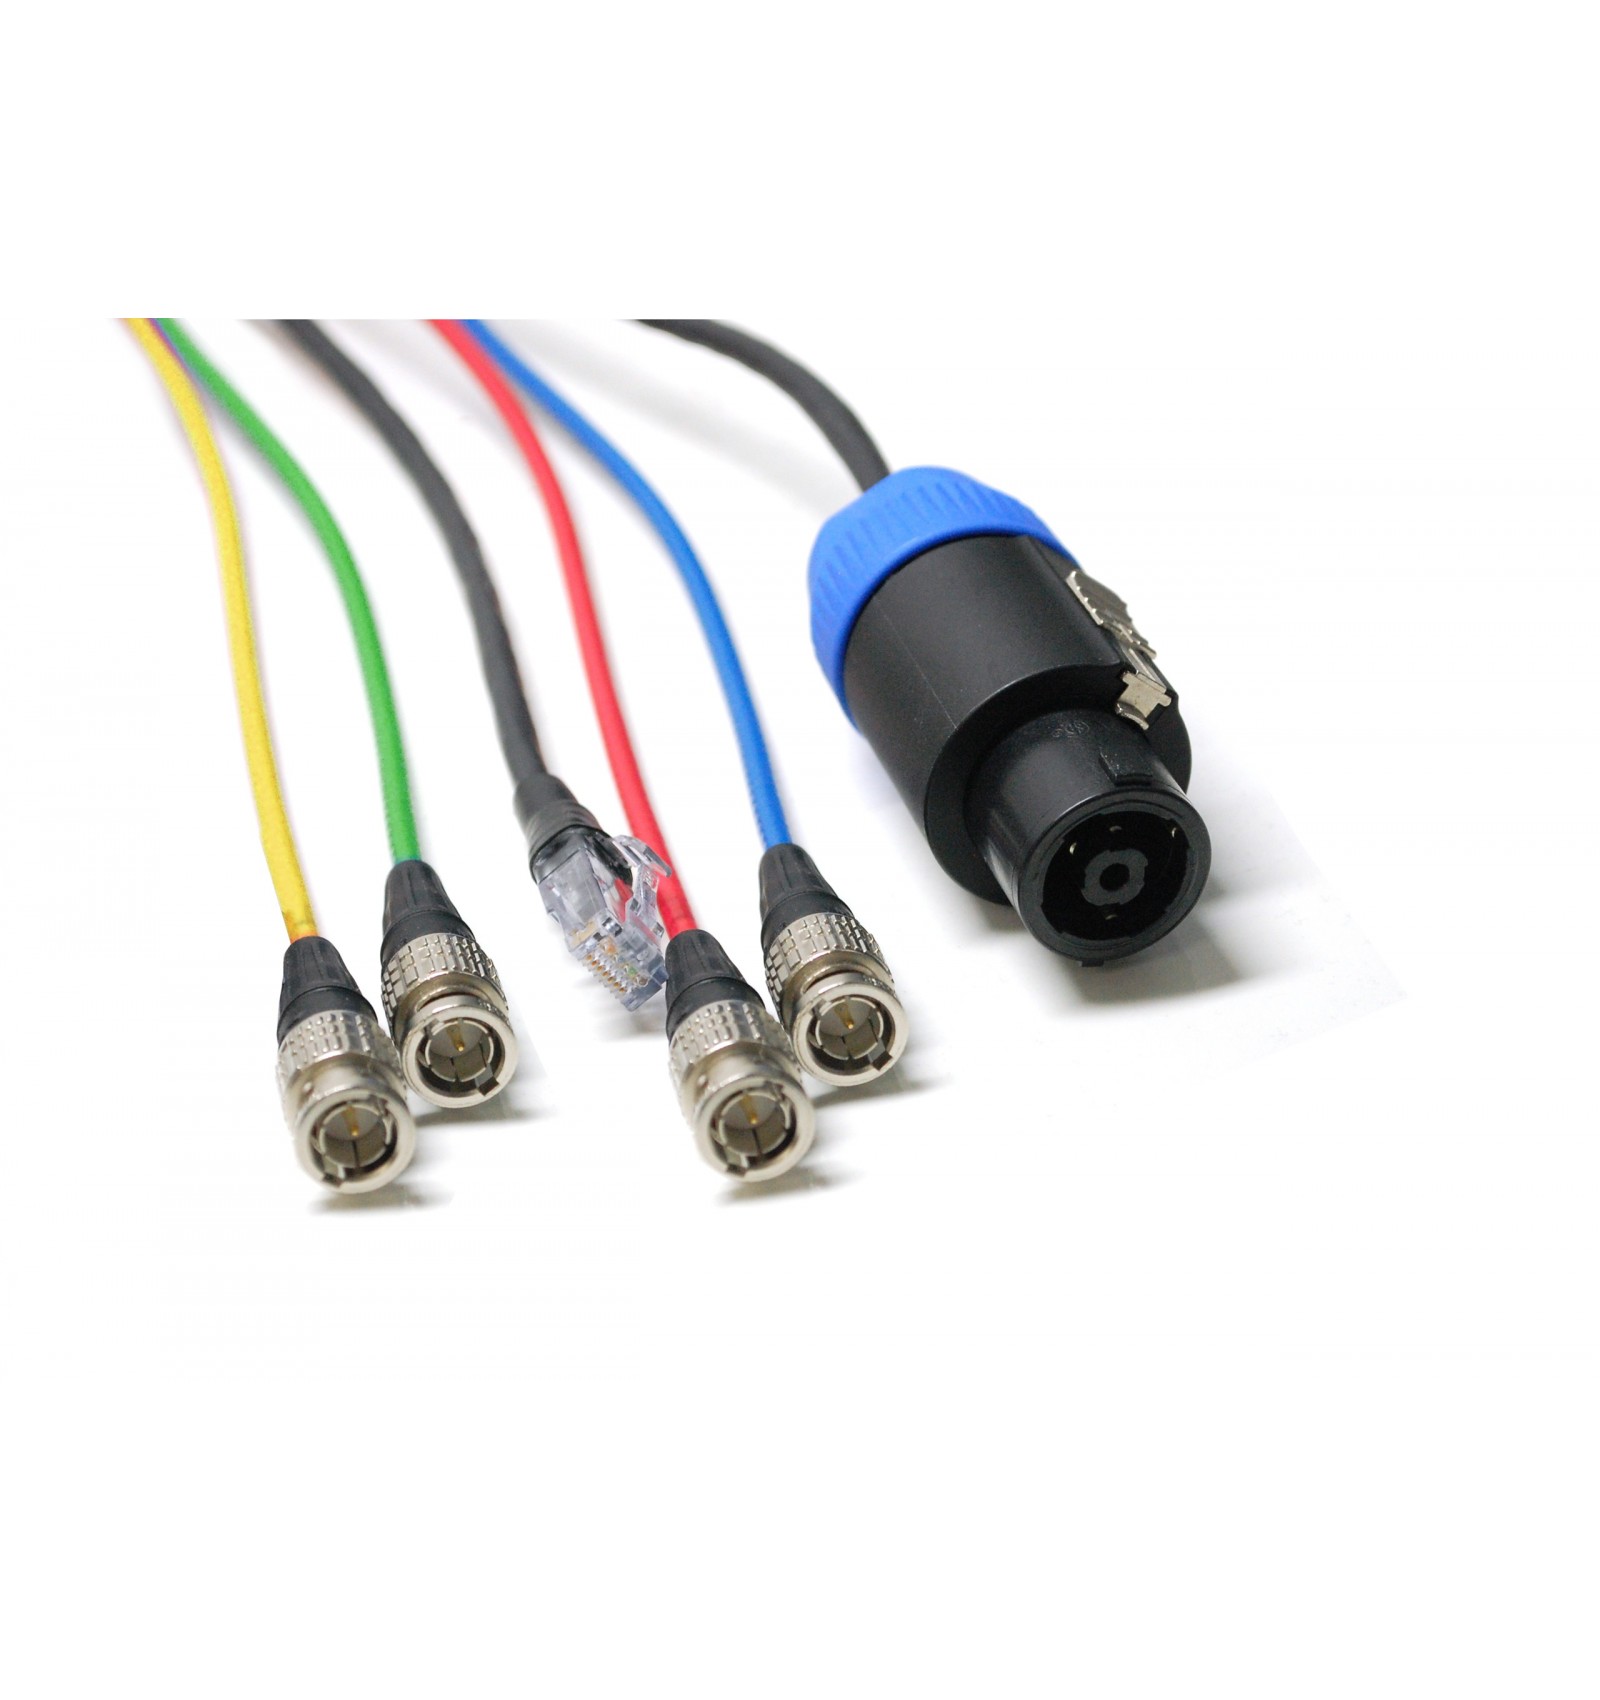 Village Runner Cable with 4 SDI lines, 2 Audio pairs 1 Ethernet and speakON